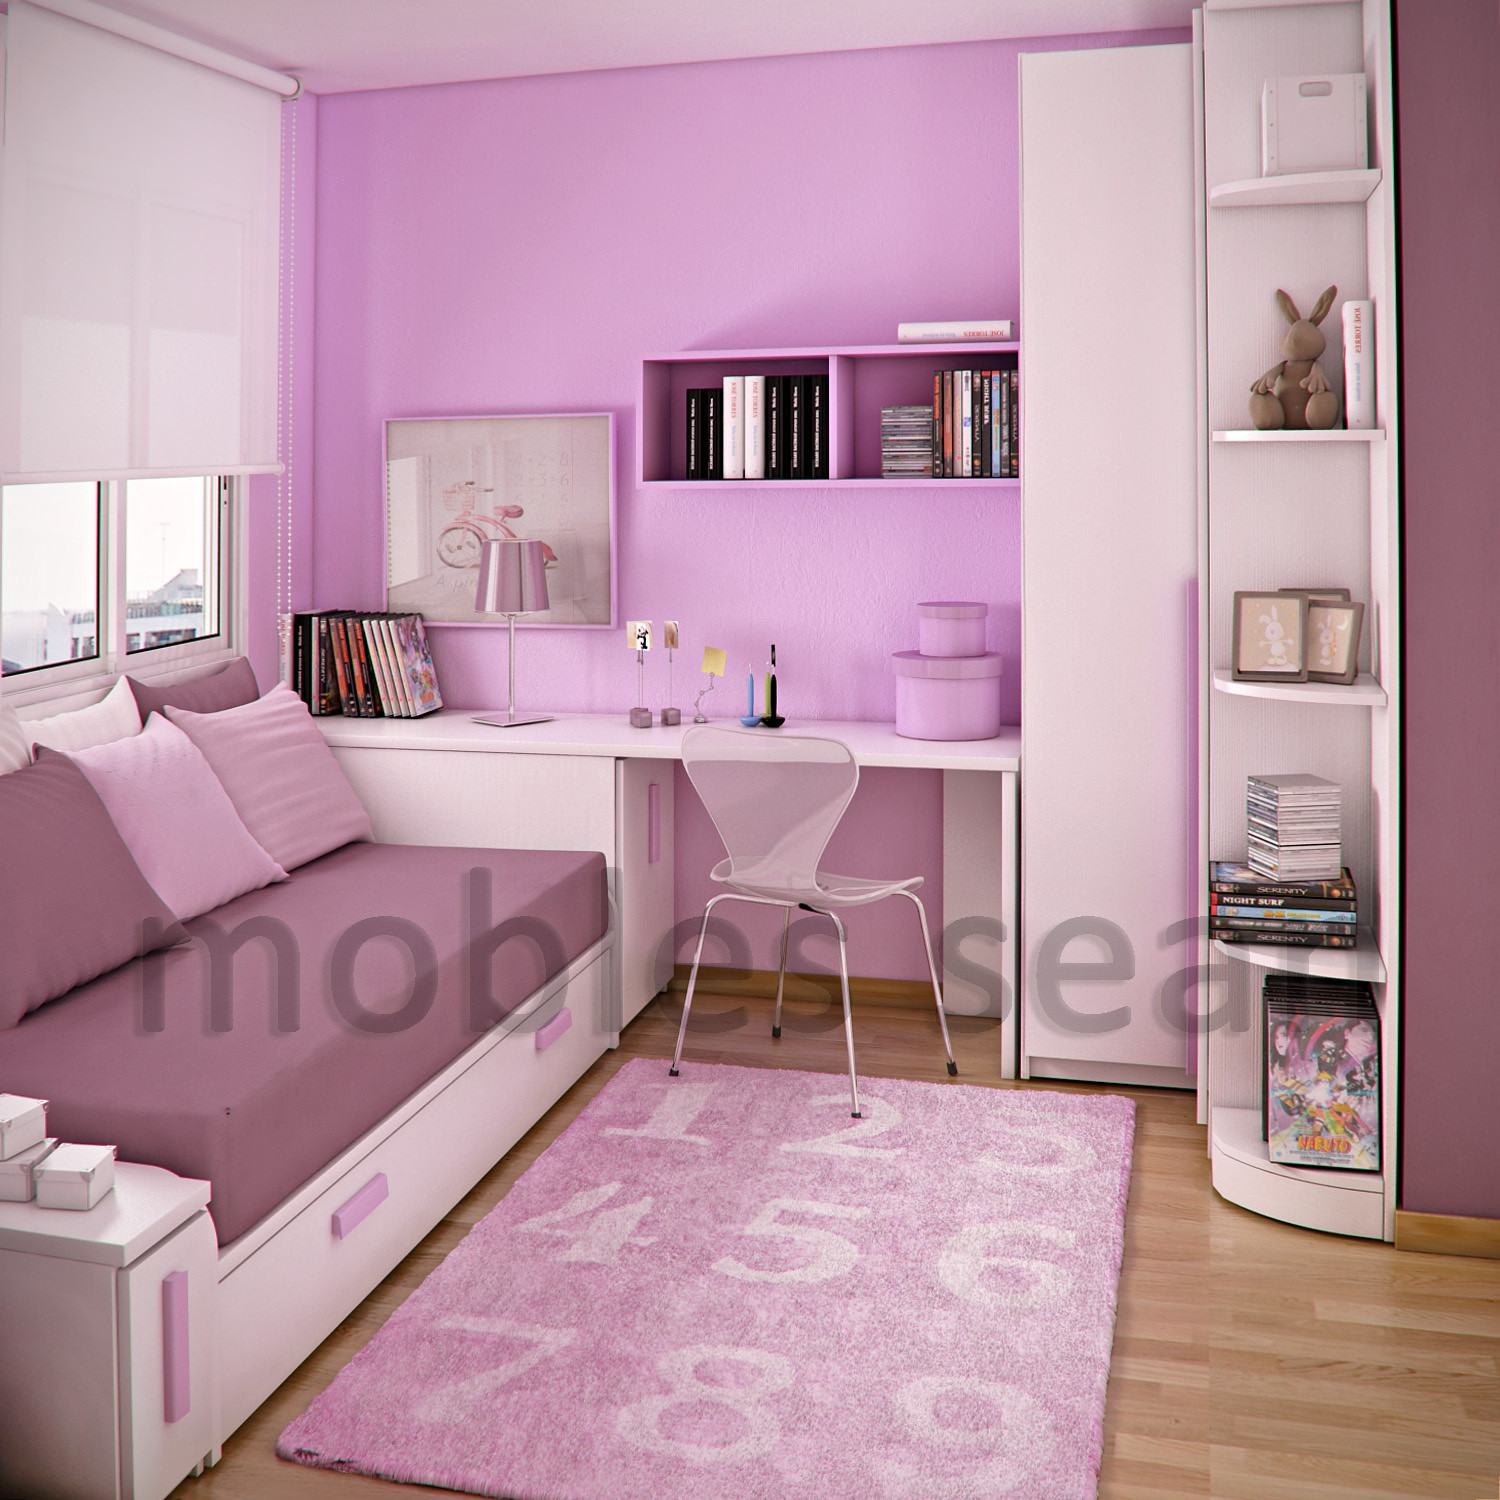 Small Space Kids Room
 Space Saving Designs for Small Kids’ Rooms Home Decoz